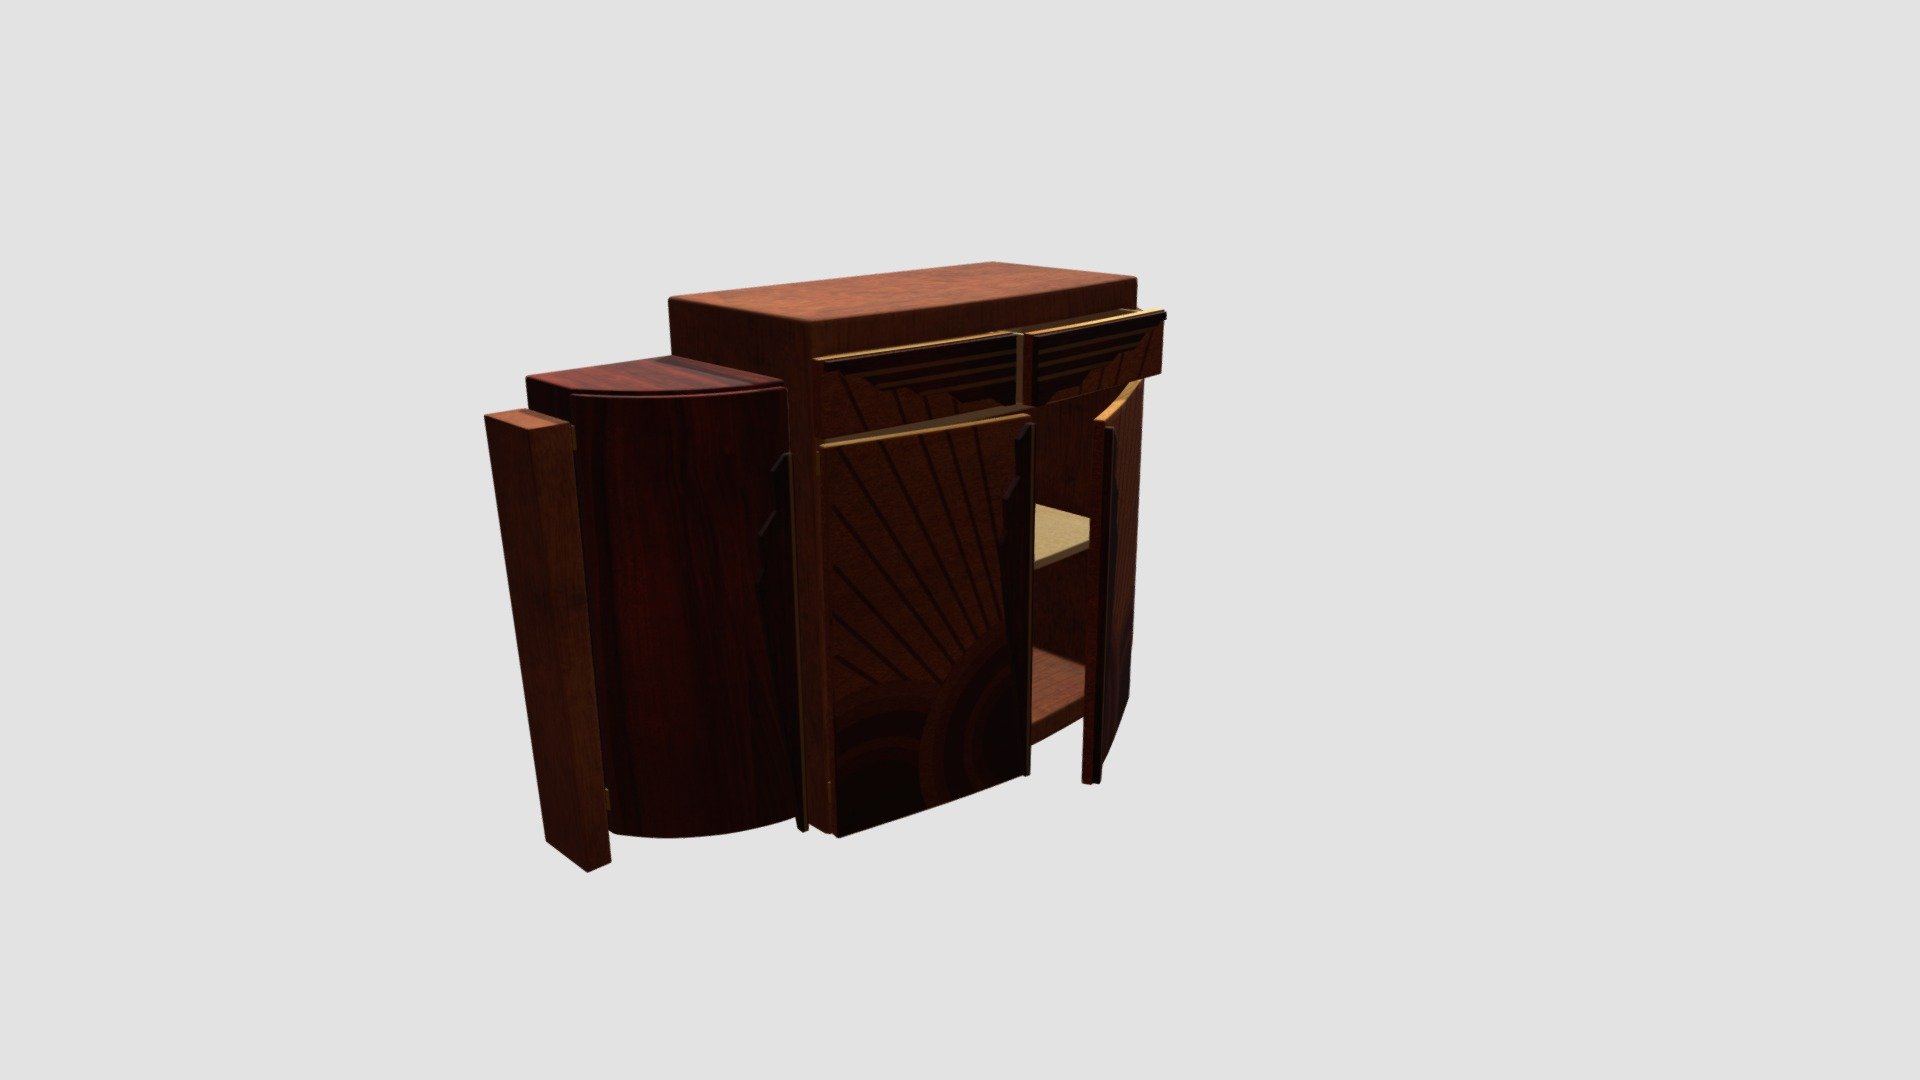 Highly detailed 3d model of cabinet with all textures, shaders and materials. It is ready to use, just put it into your scene 3d model